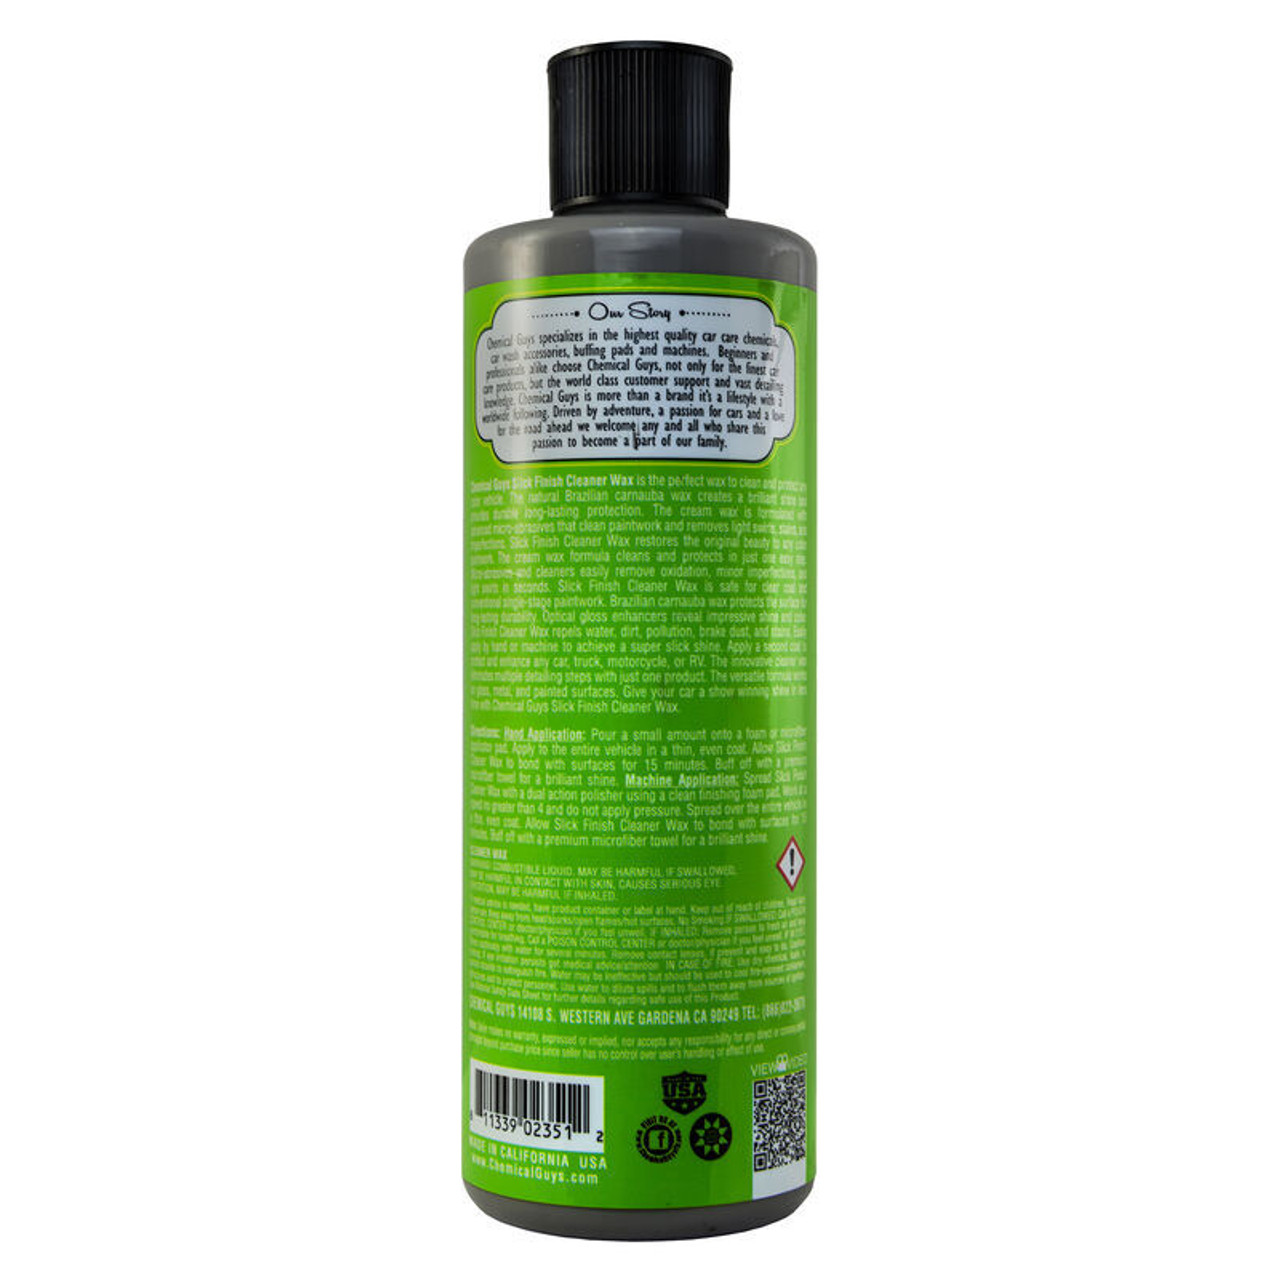 Chemical Guys Slick Finish Cleaner Wax - Label